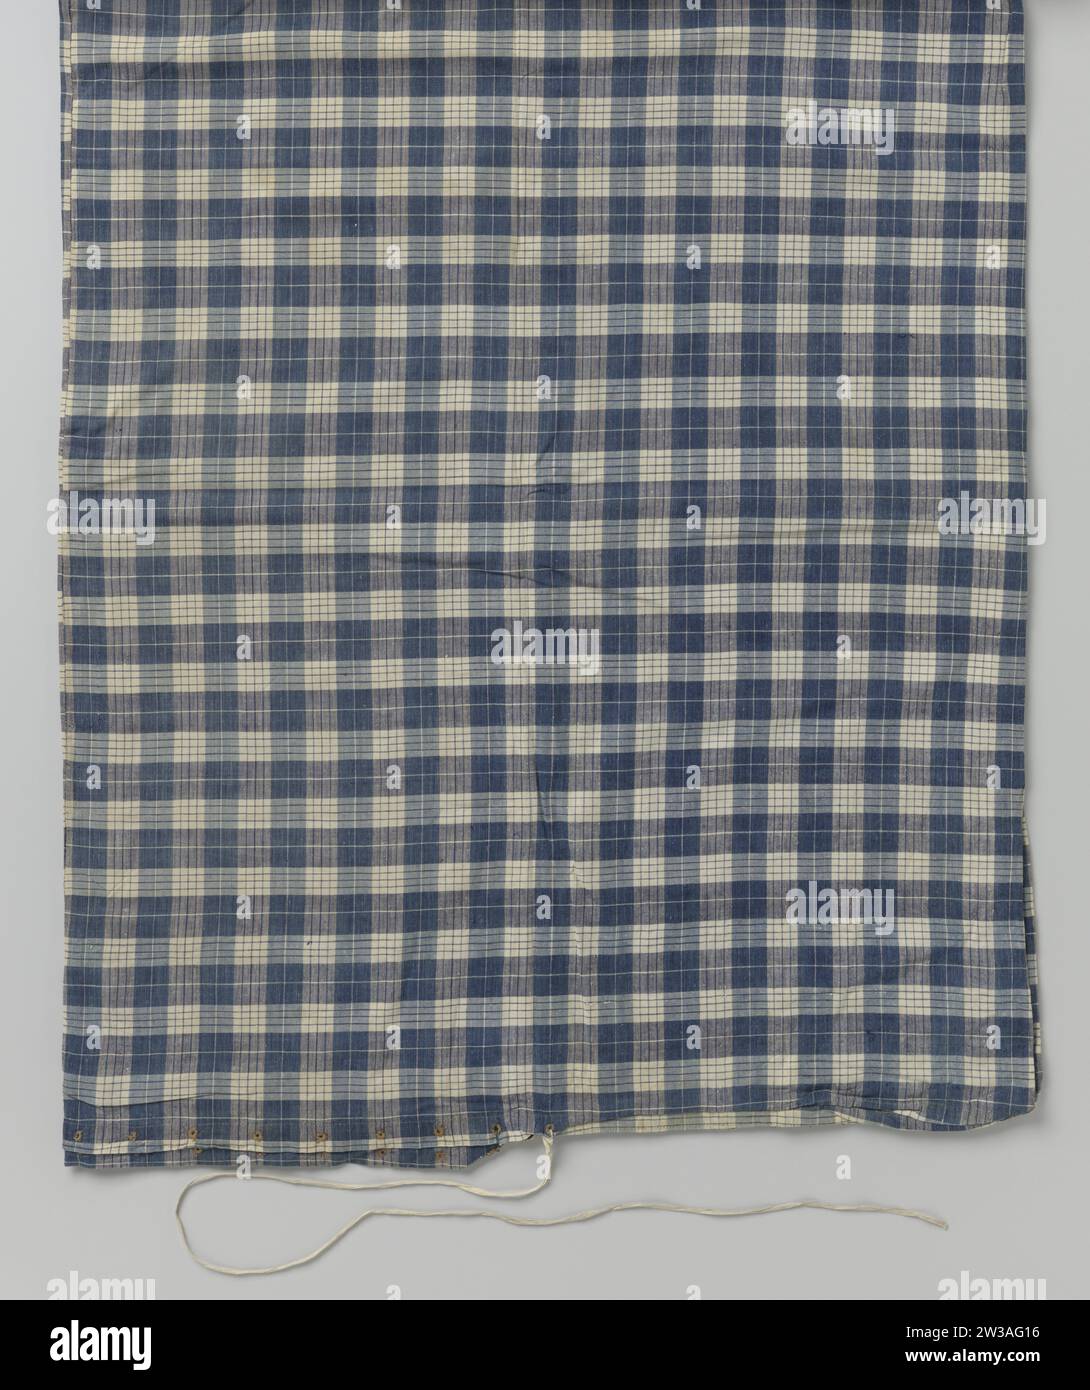 Bed cover of Tijk, Anonymous, c. 1800 - c. 1950 Tiking Bed cover, Blue-White checkered and striped. India (possibly) cotton (textile) Tiking Bed cover, Blue-White checkered and striped. India (possibly) cotton (textile) Stock Photo